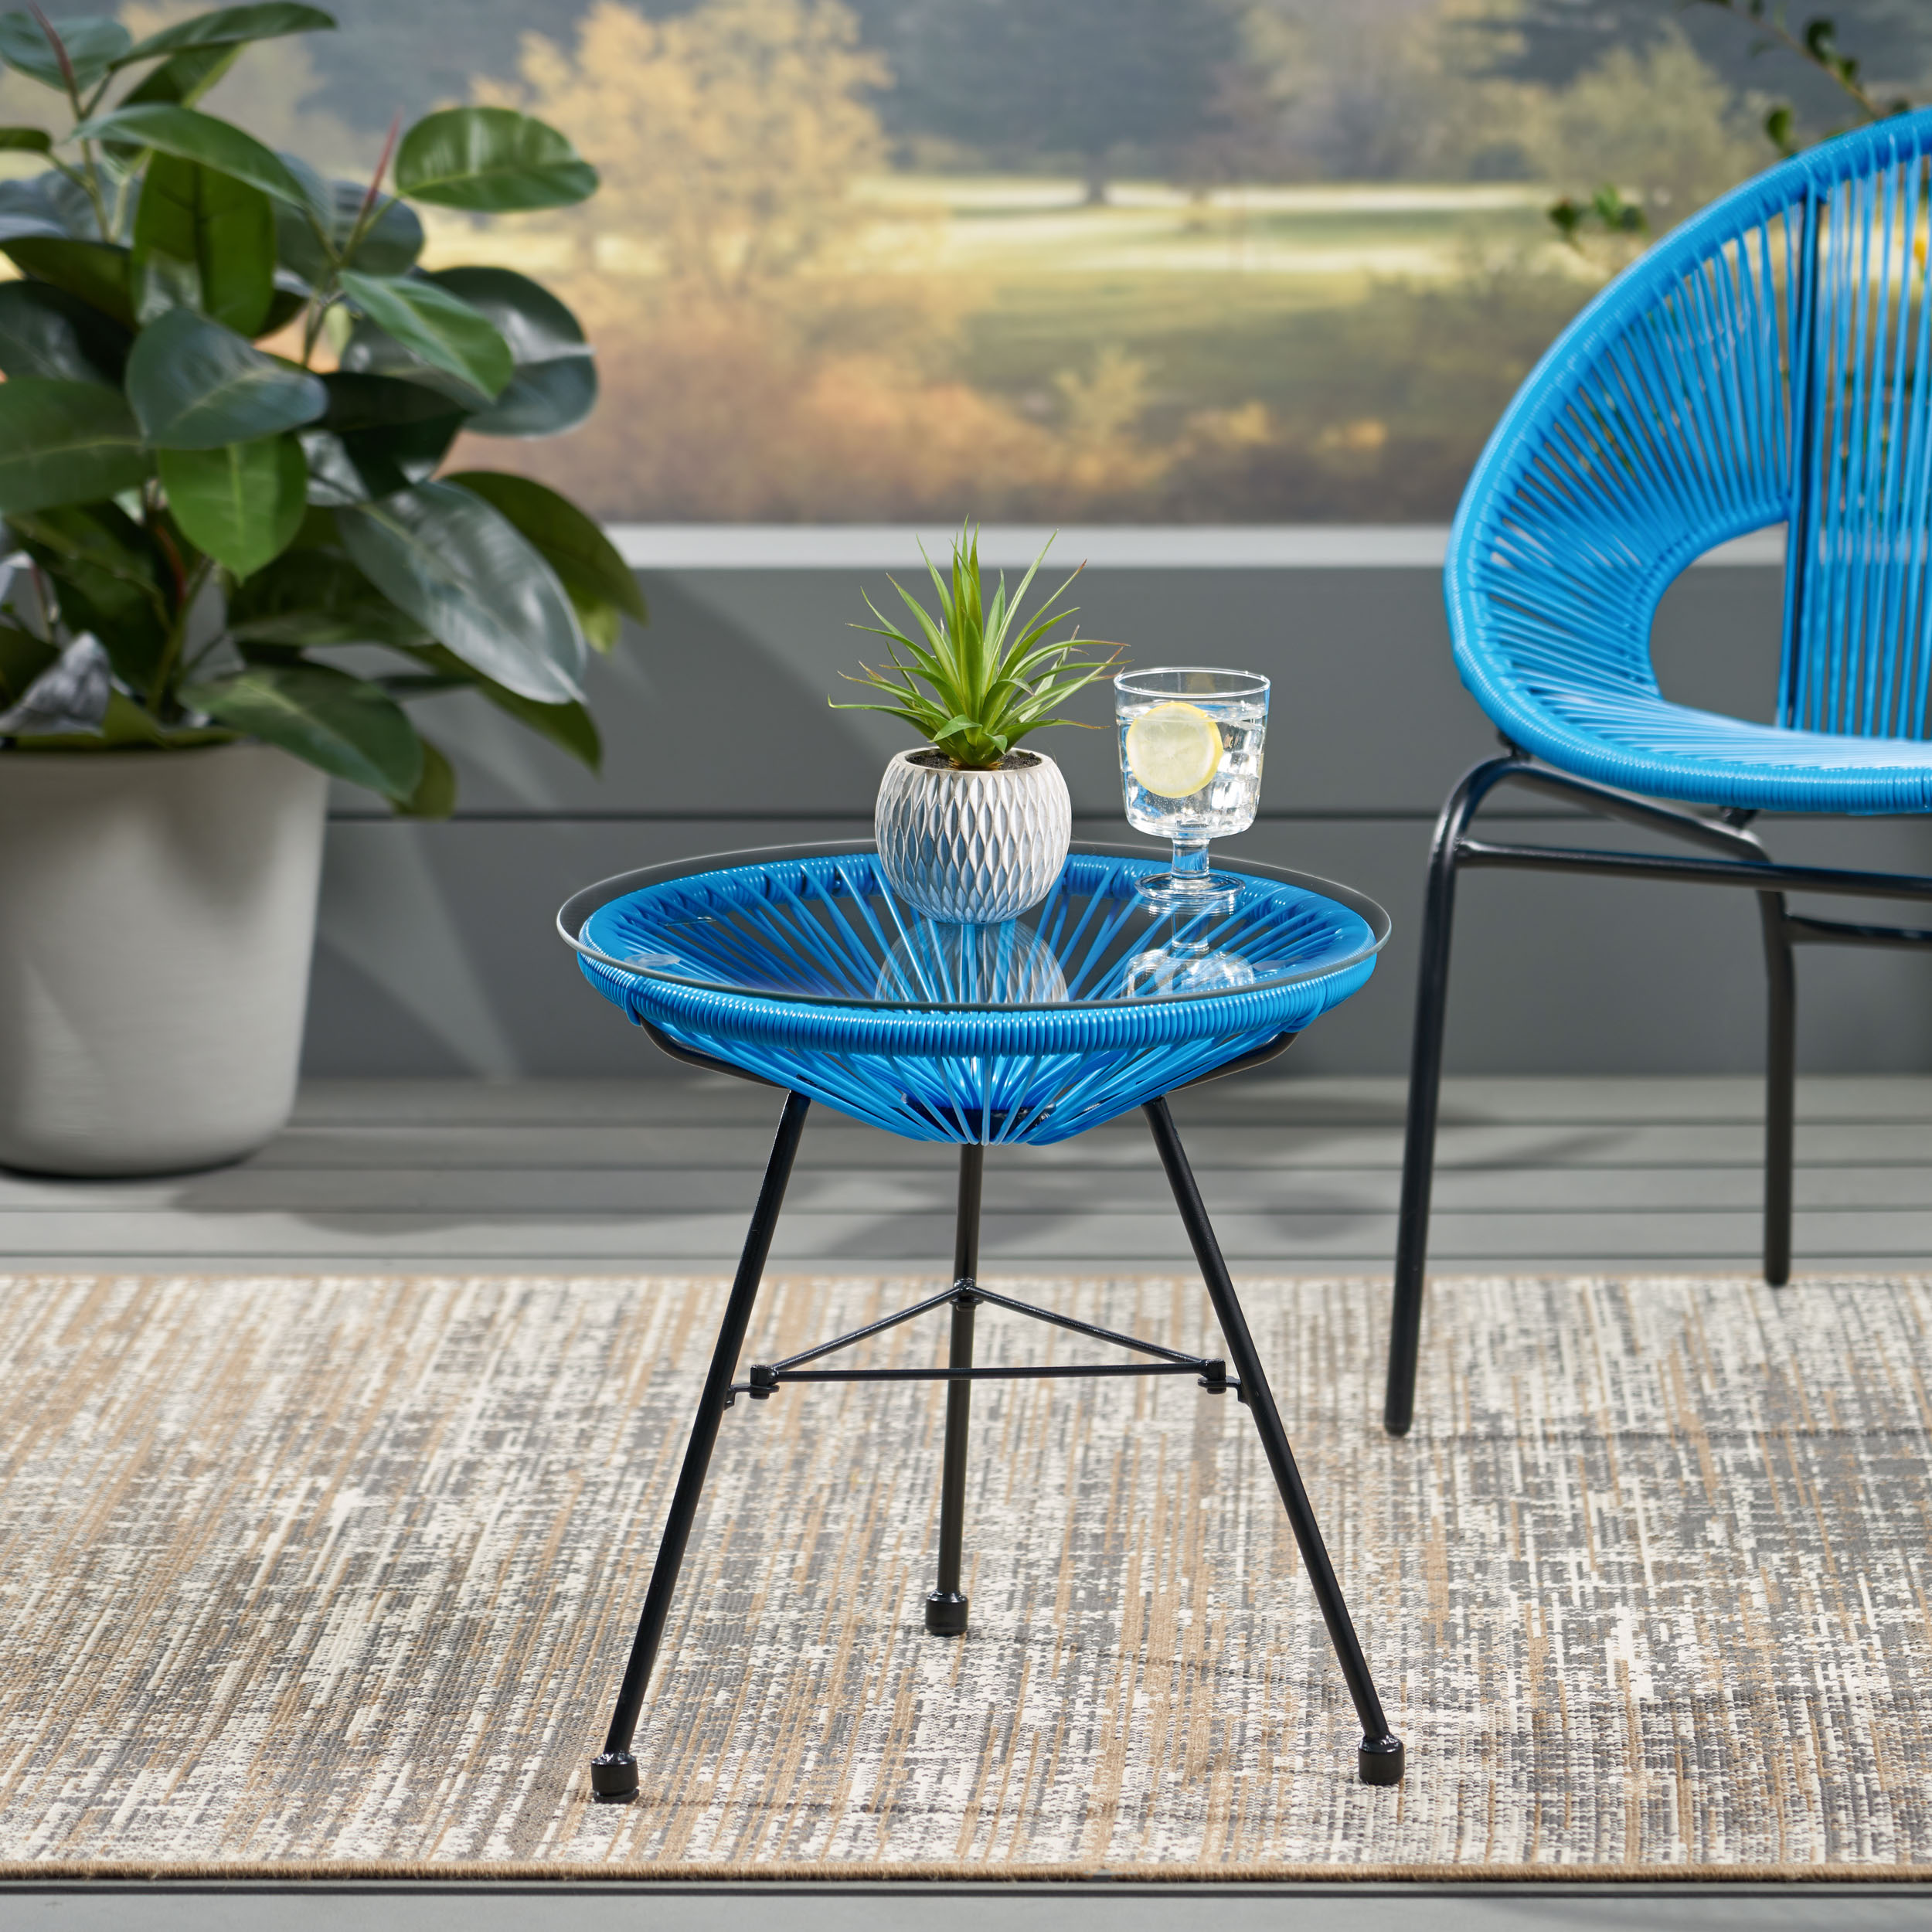 GDF Studio Chrissy Outdoor Modern Faux Rattan Side Table with Tempered Glass Top, Blue and Black - image 2 of 9